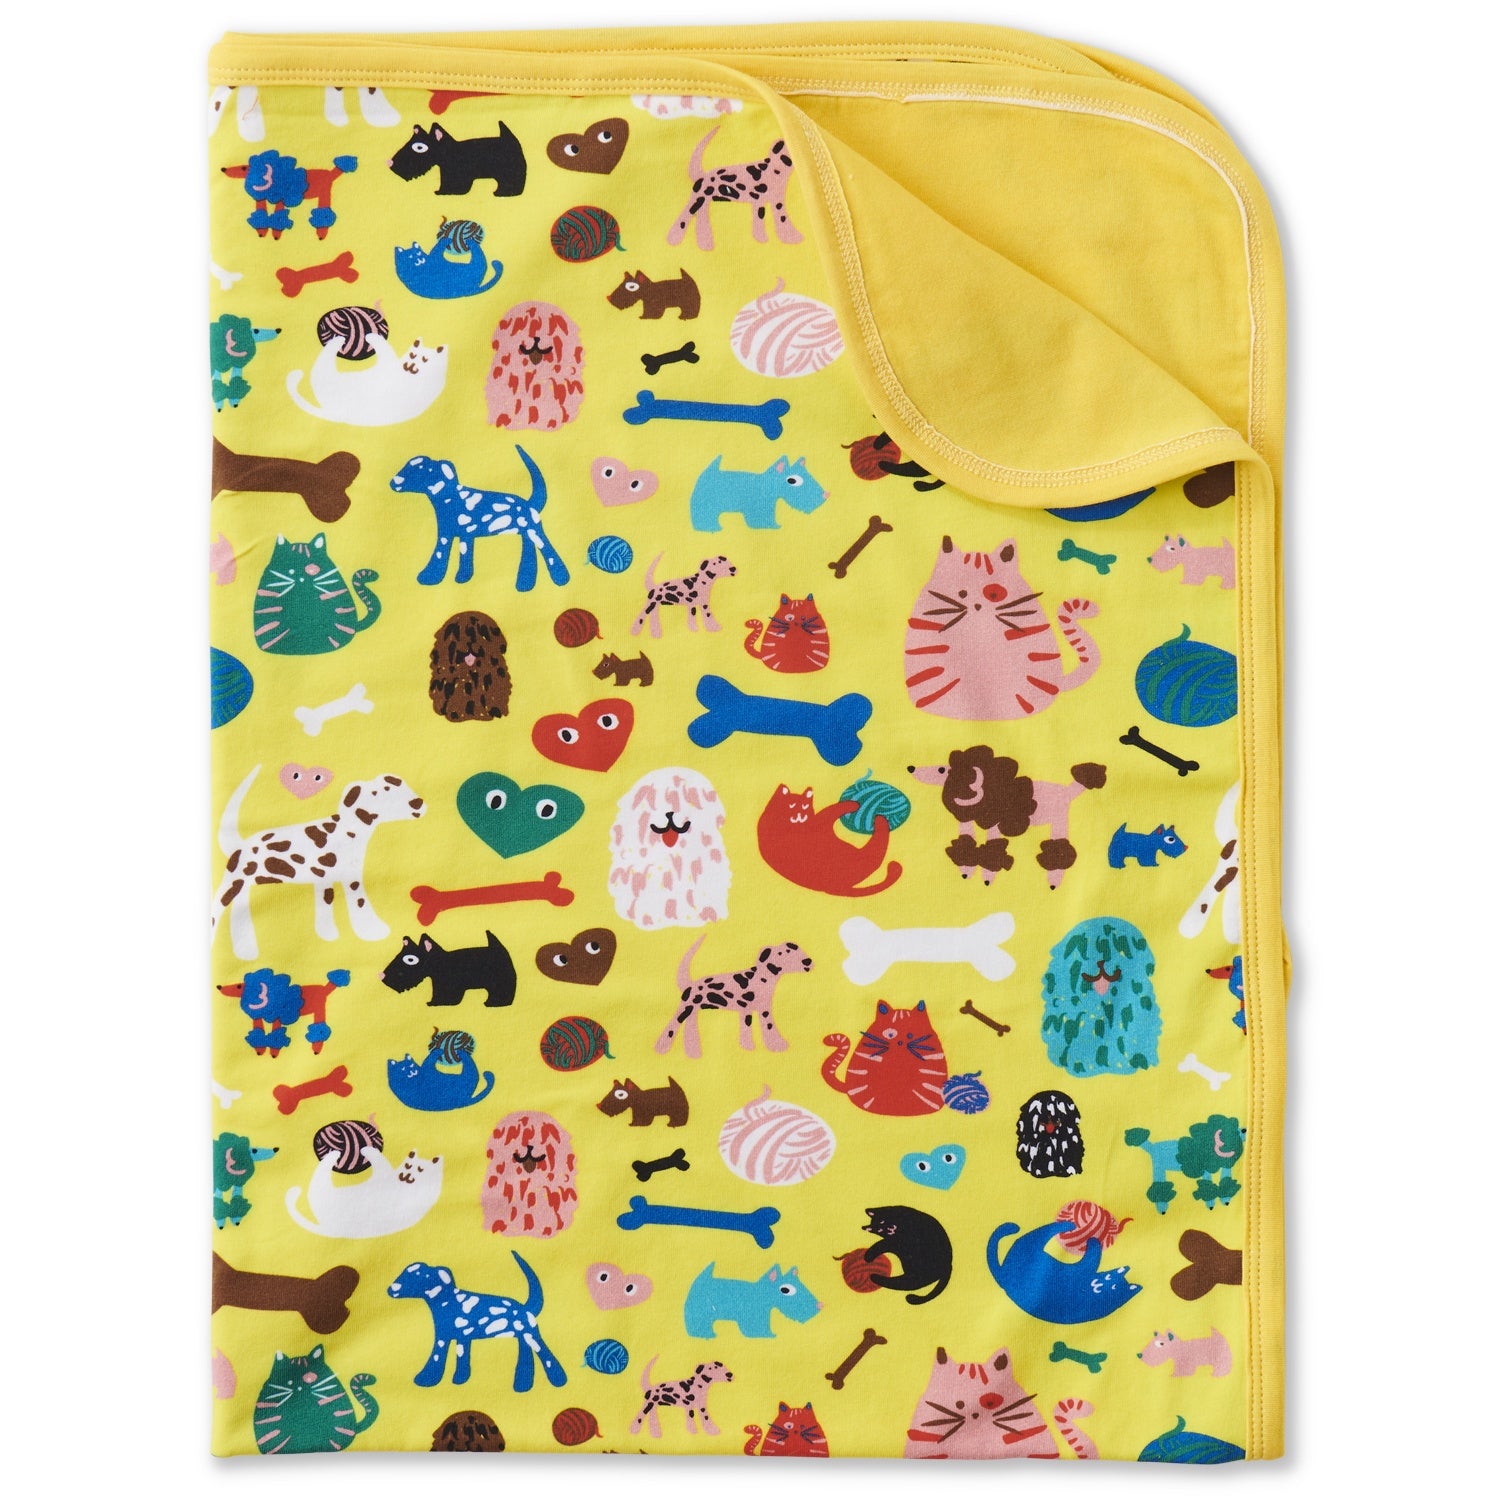 Organic Cotton Stroller Blanket - Cats & Dogs